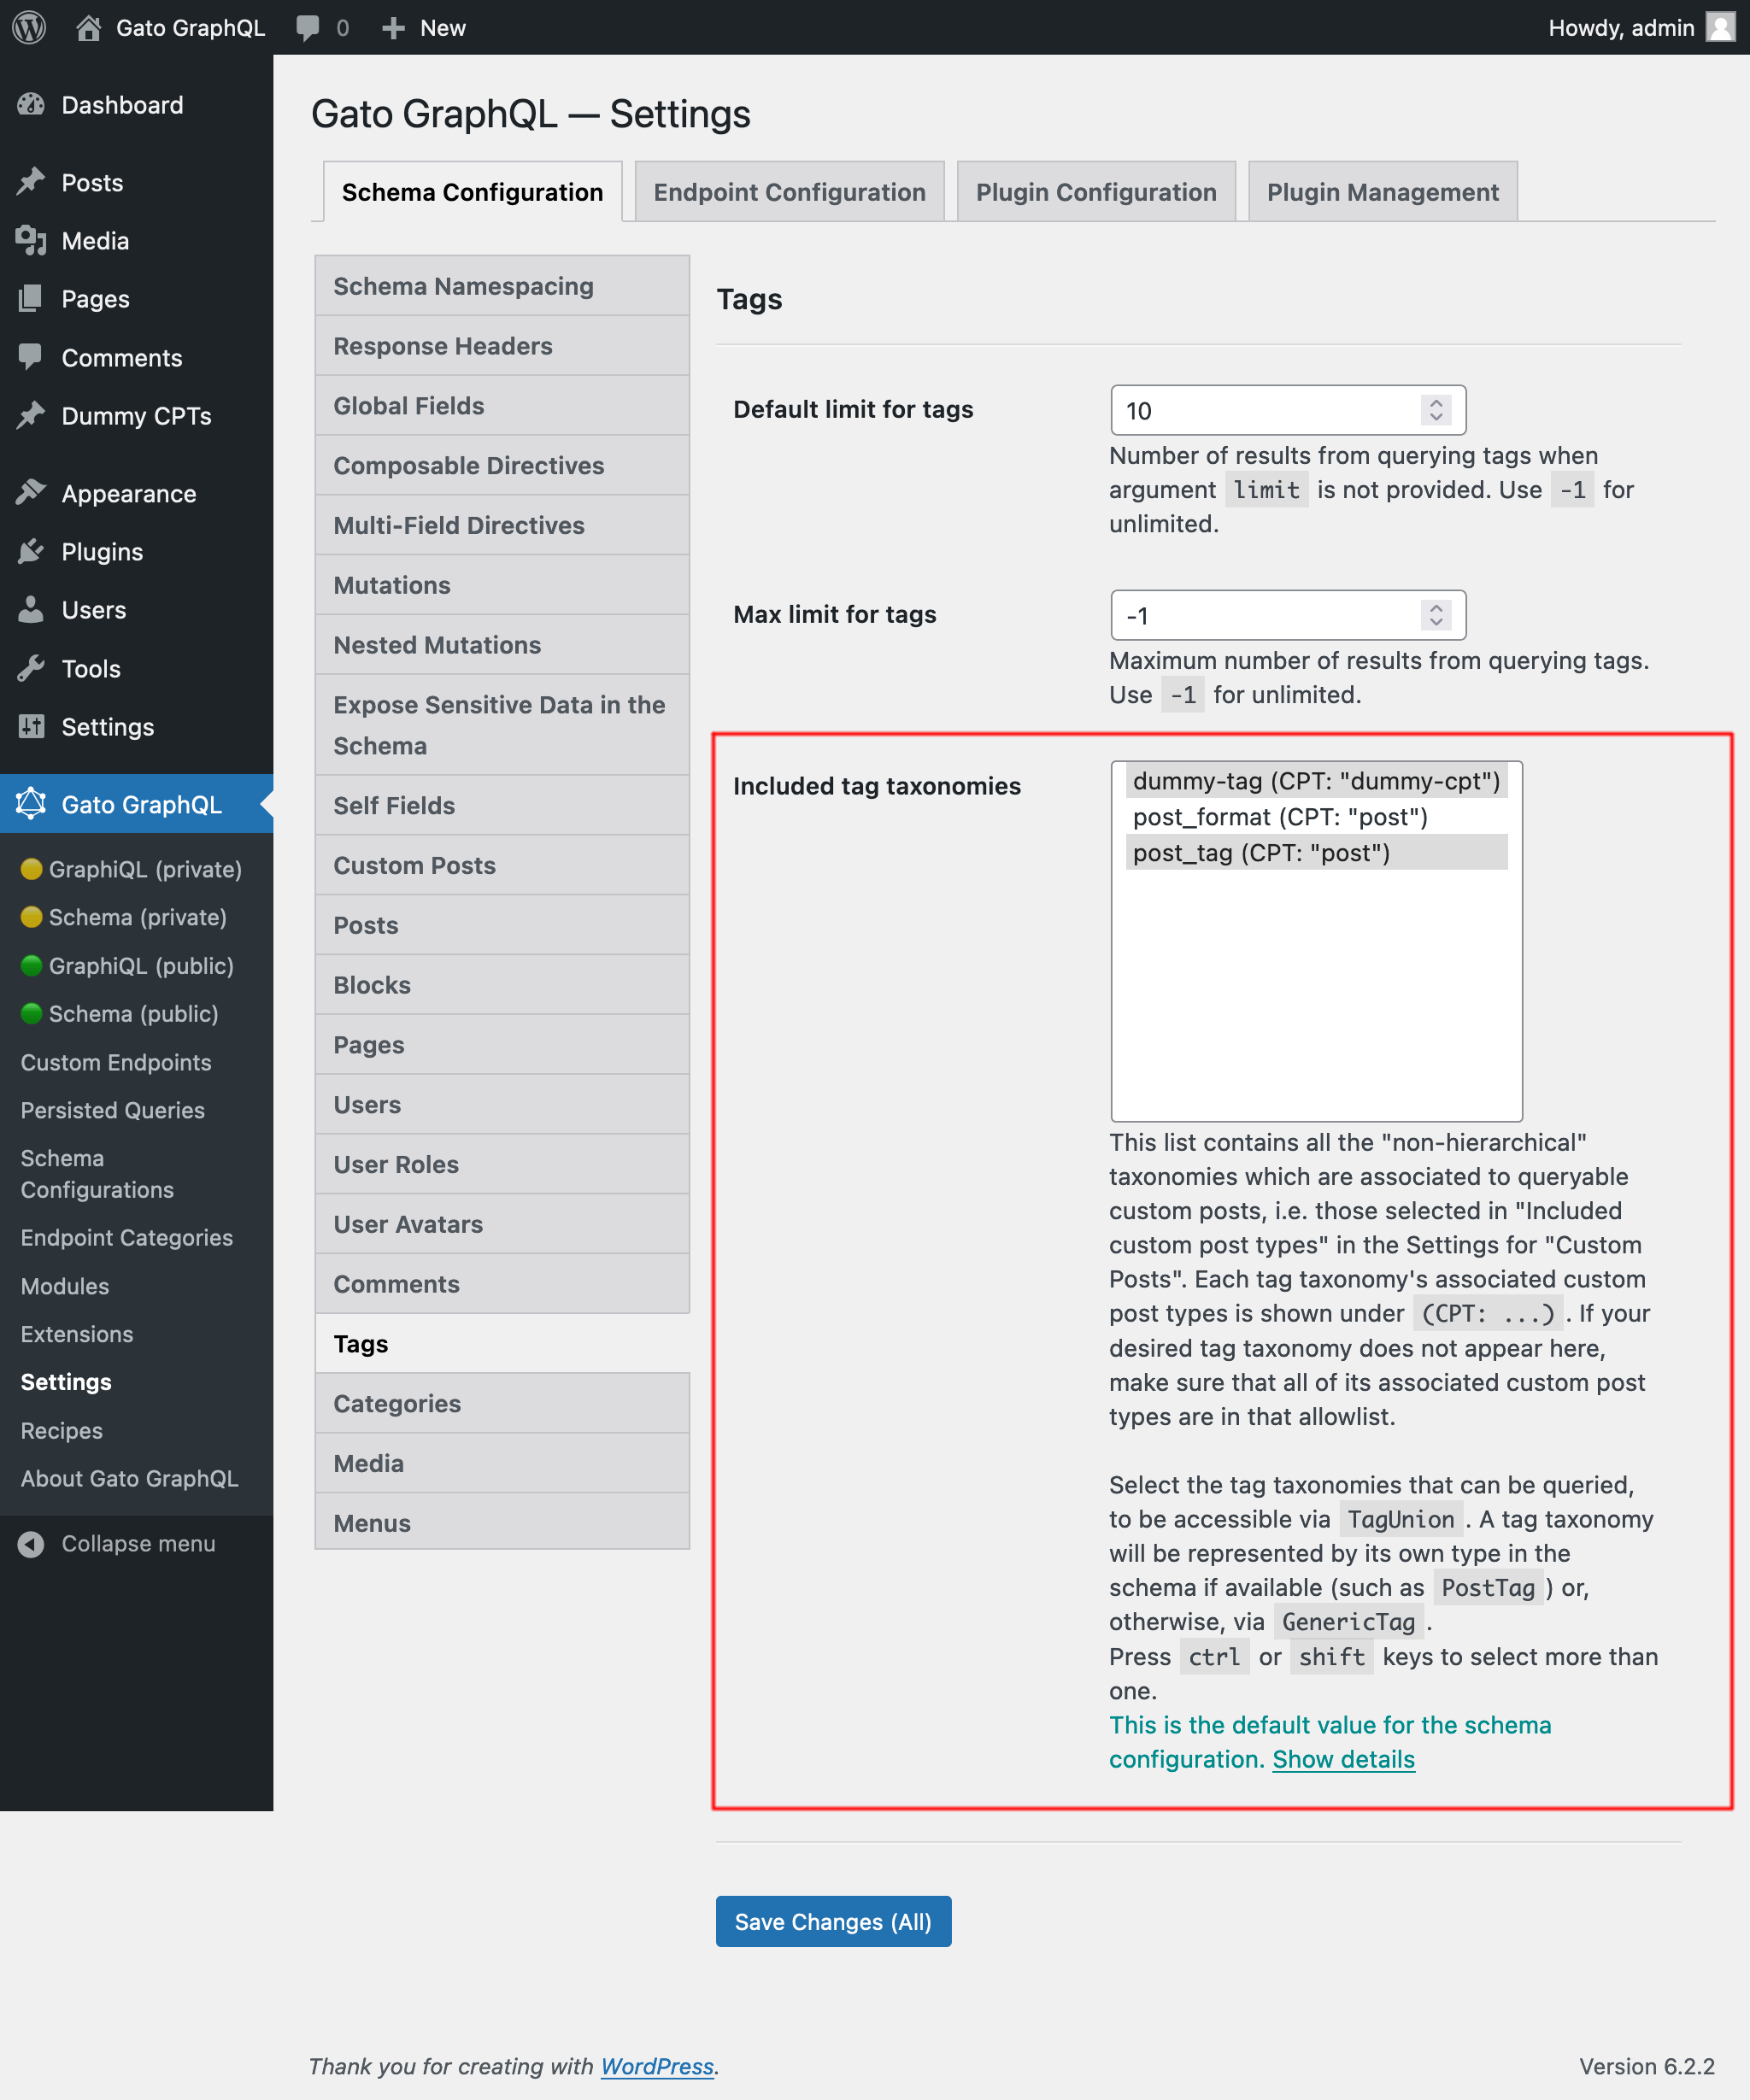 Selecting the allowed tag taxonomies in the Settings